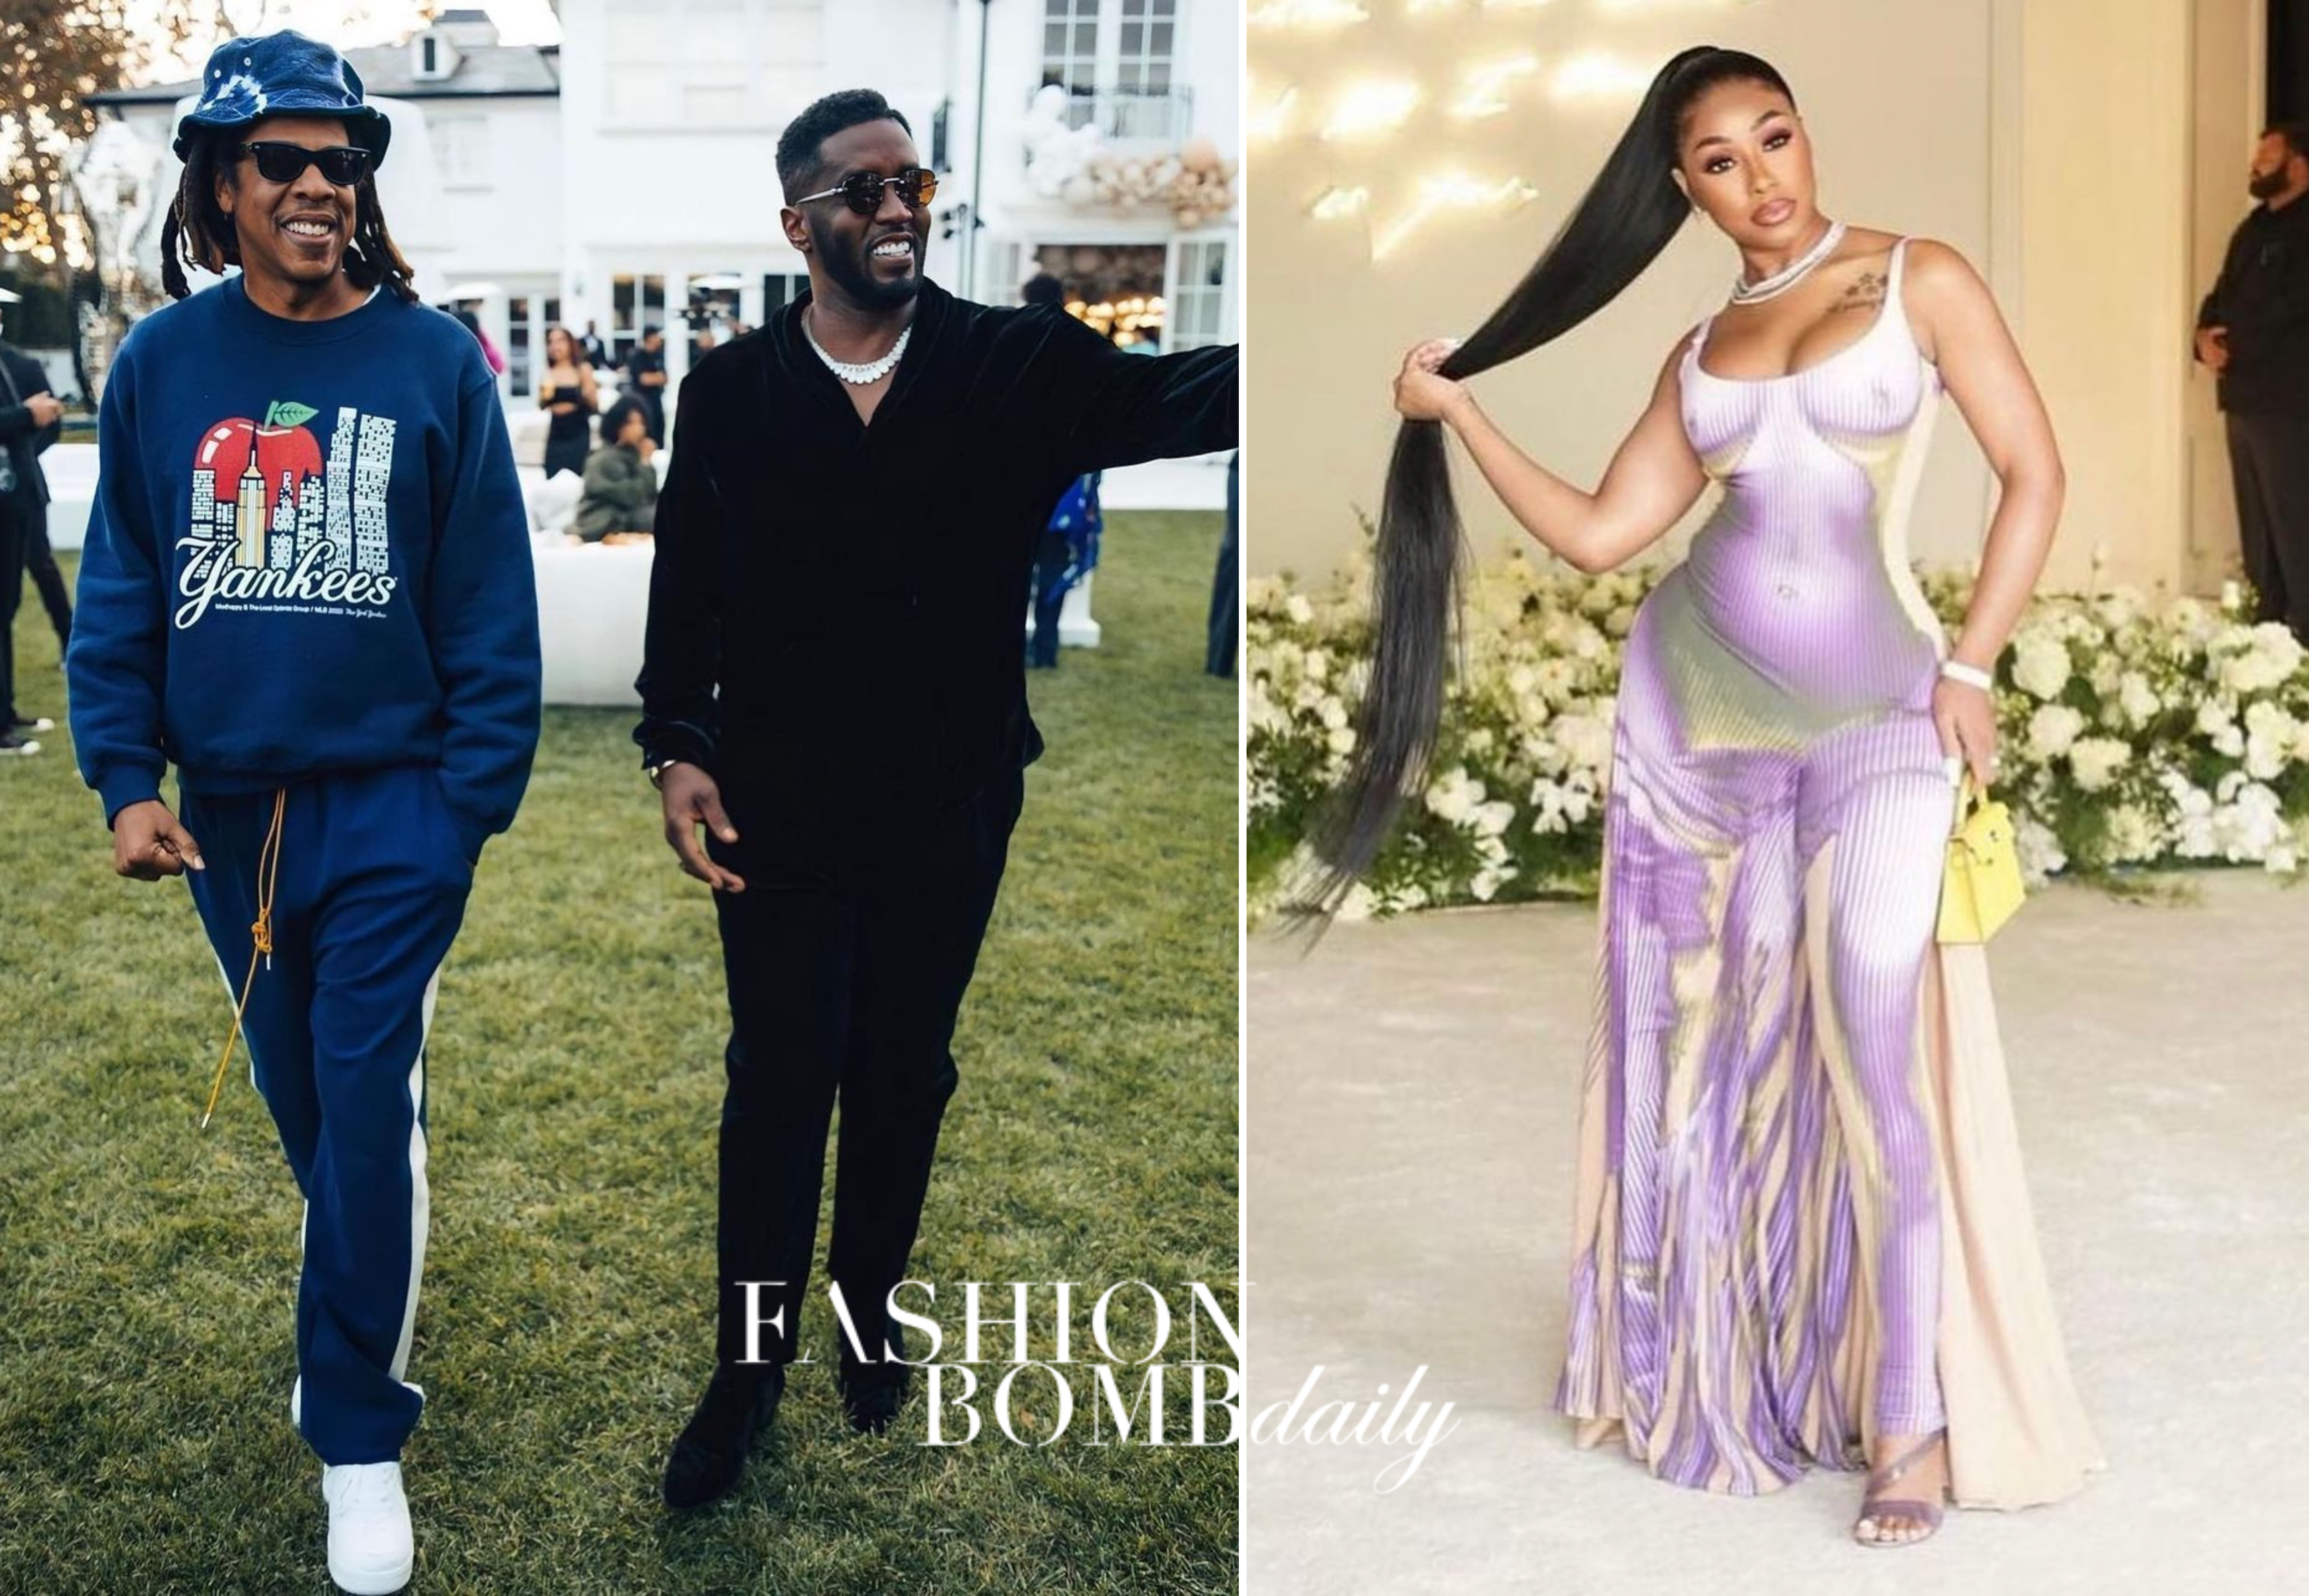 Mary J. Blige Toasted in D&G, Yung Miami Partied Wearing Jean Paul Gaultier x Y/Project, Jay-Z Attended in Rhude and More